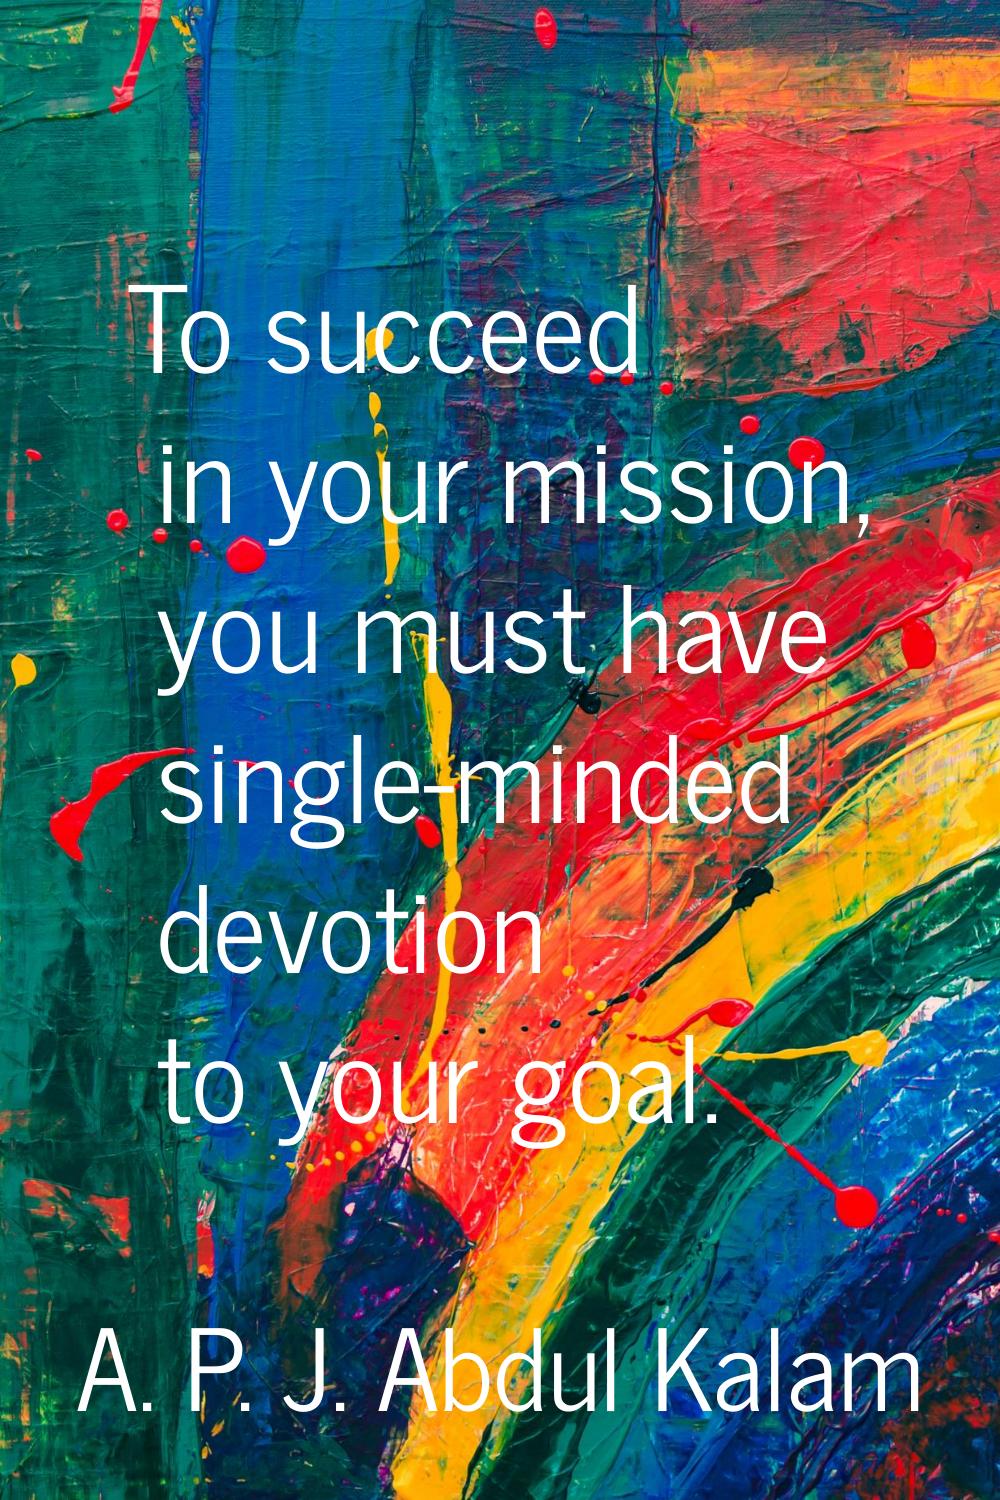 To succeed in your mission, you must have single-minded devotion to your goal.